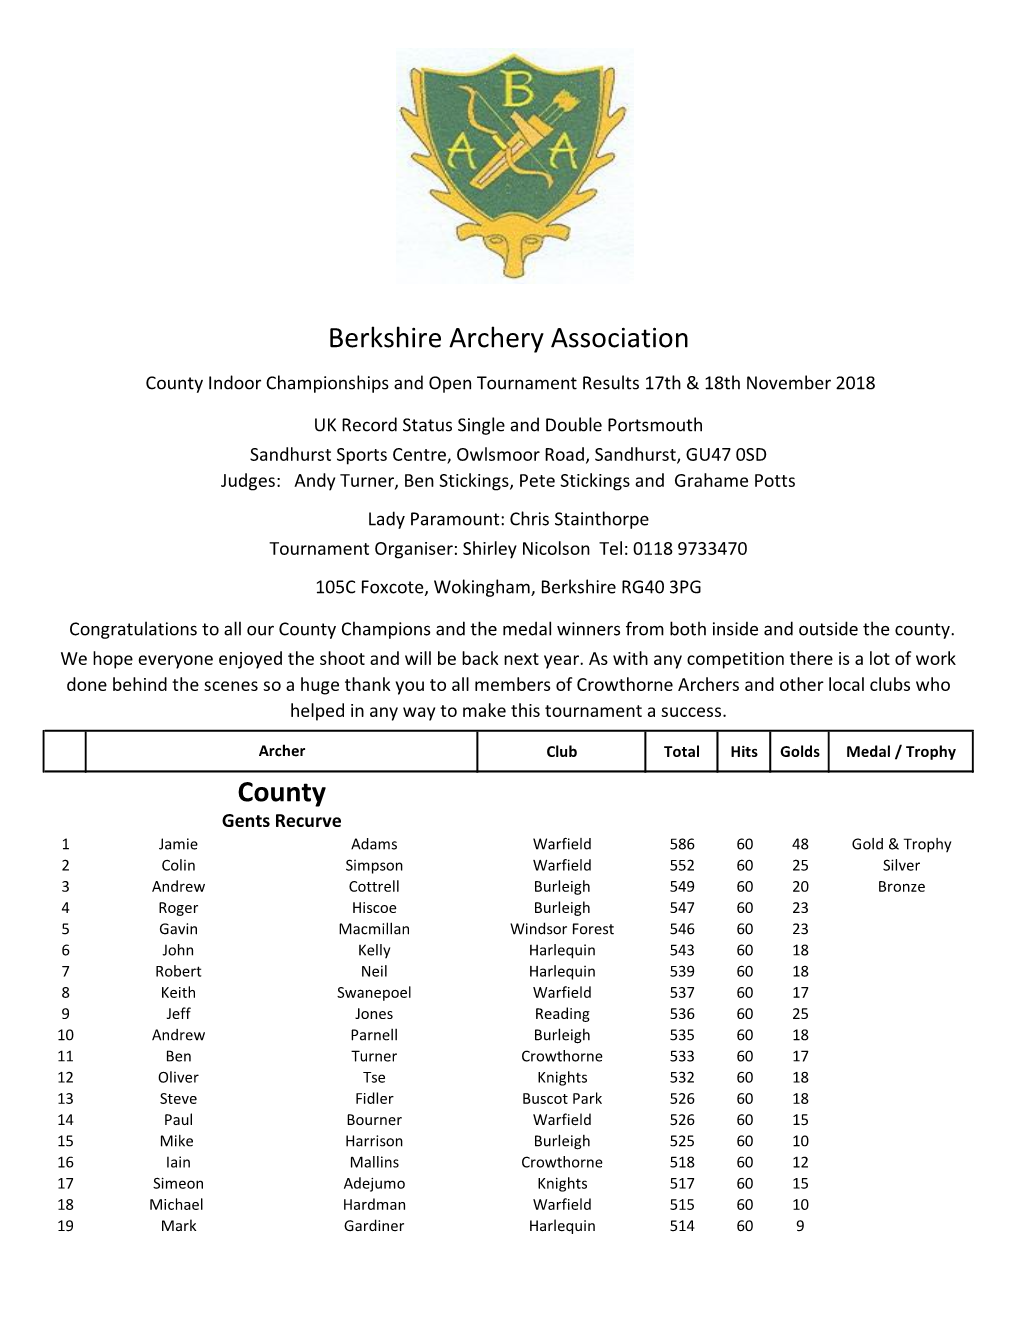 Berkshire Archery Association County Indoor Championships and Open Tournament Results 17Th & 18Th November 2018